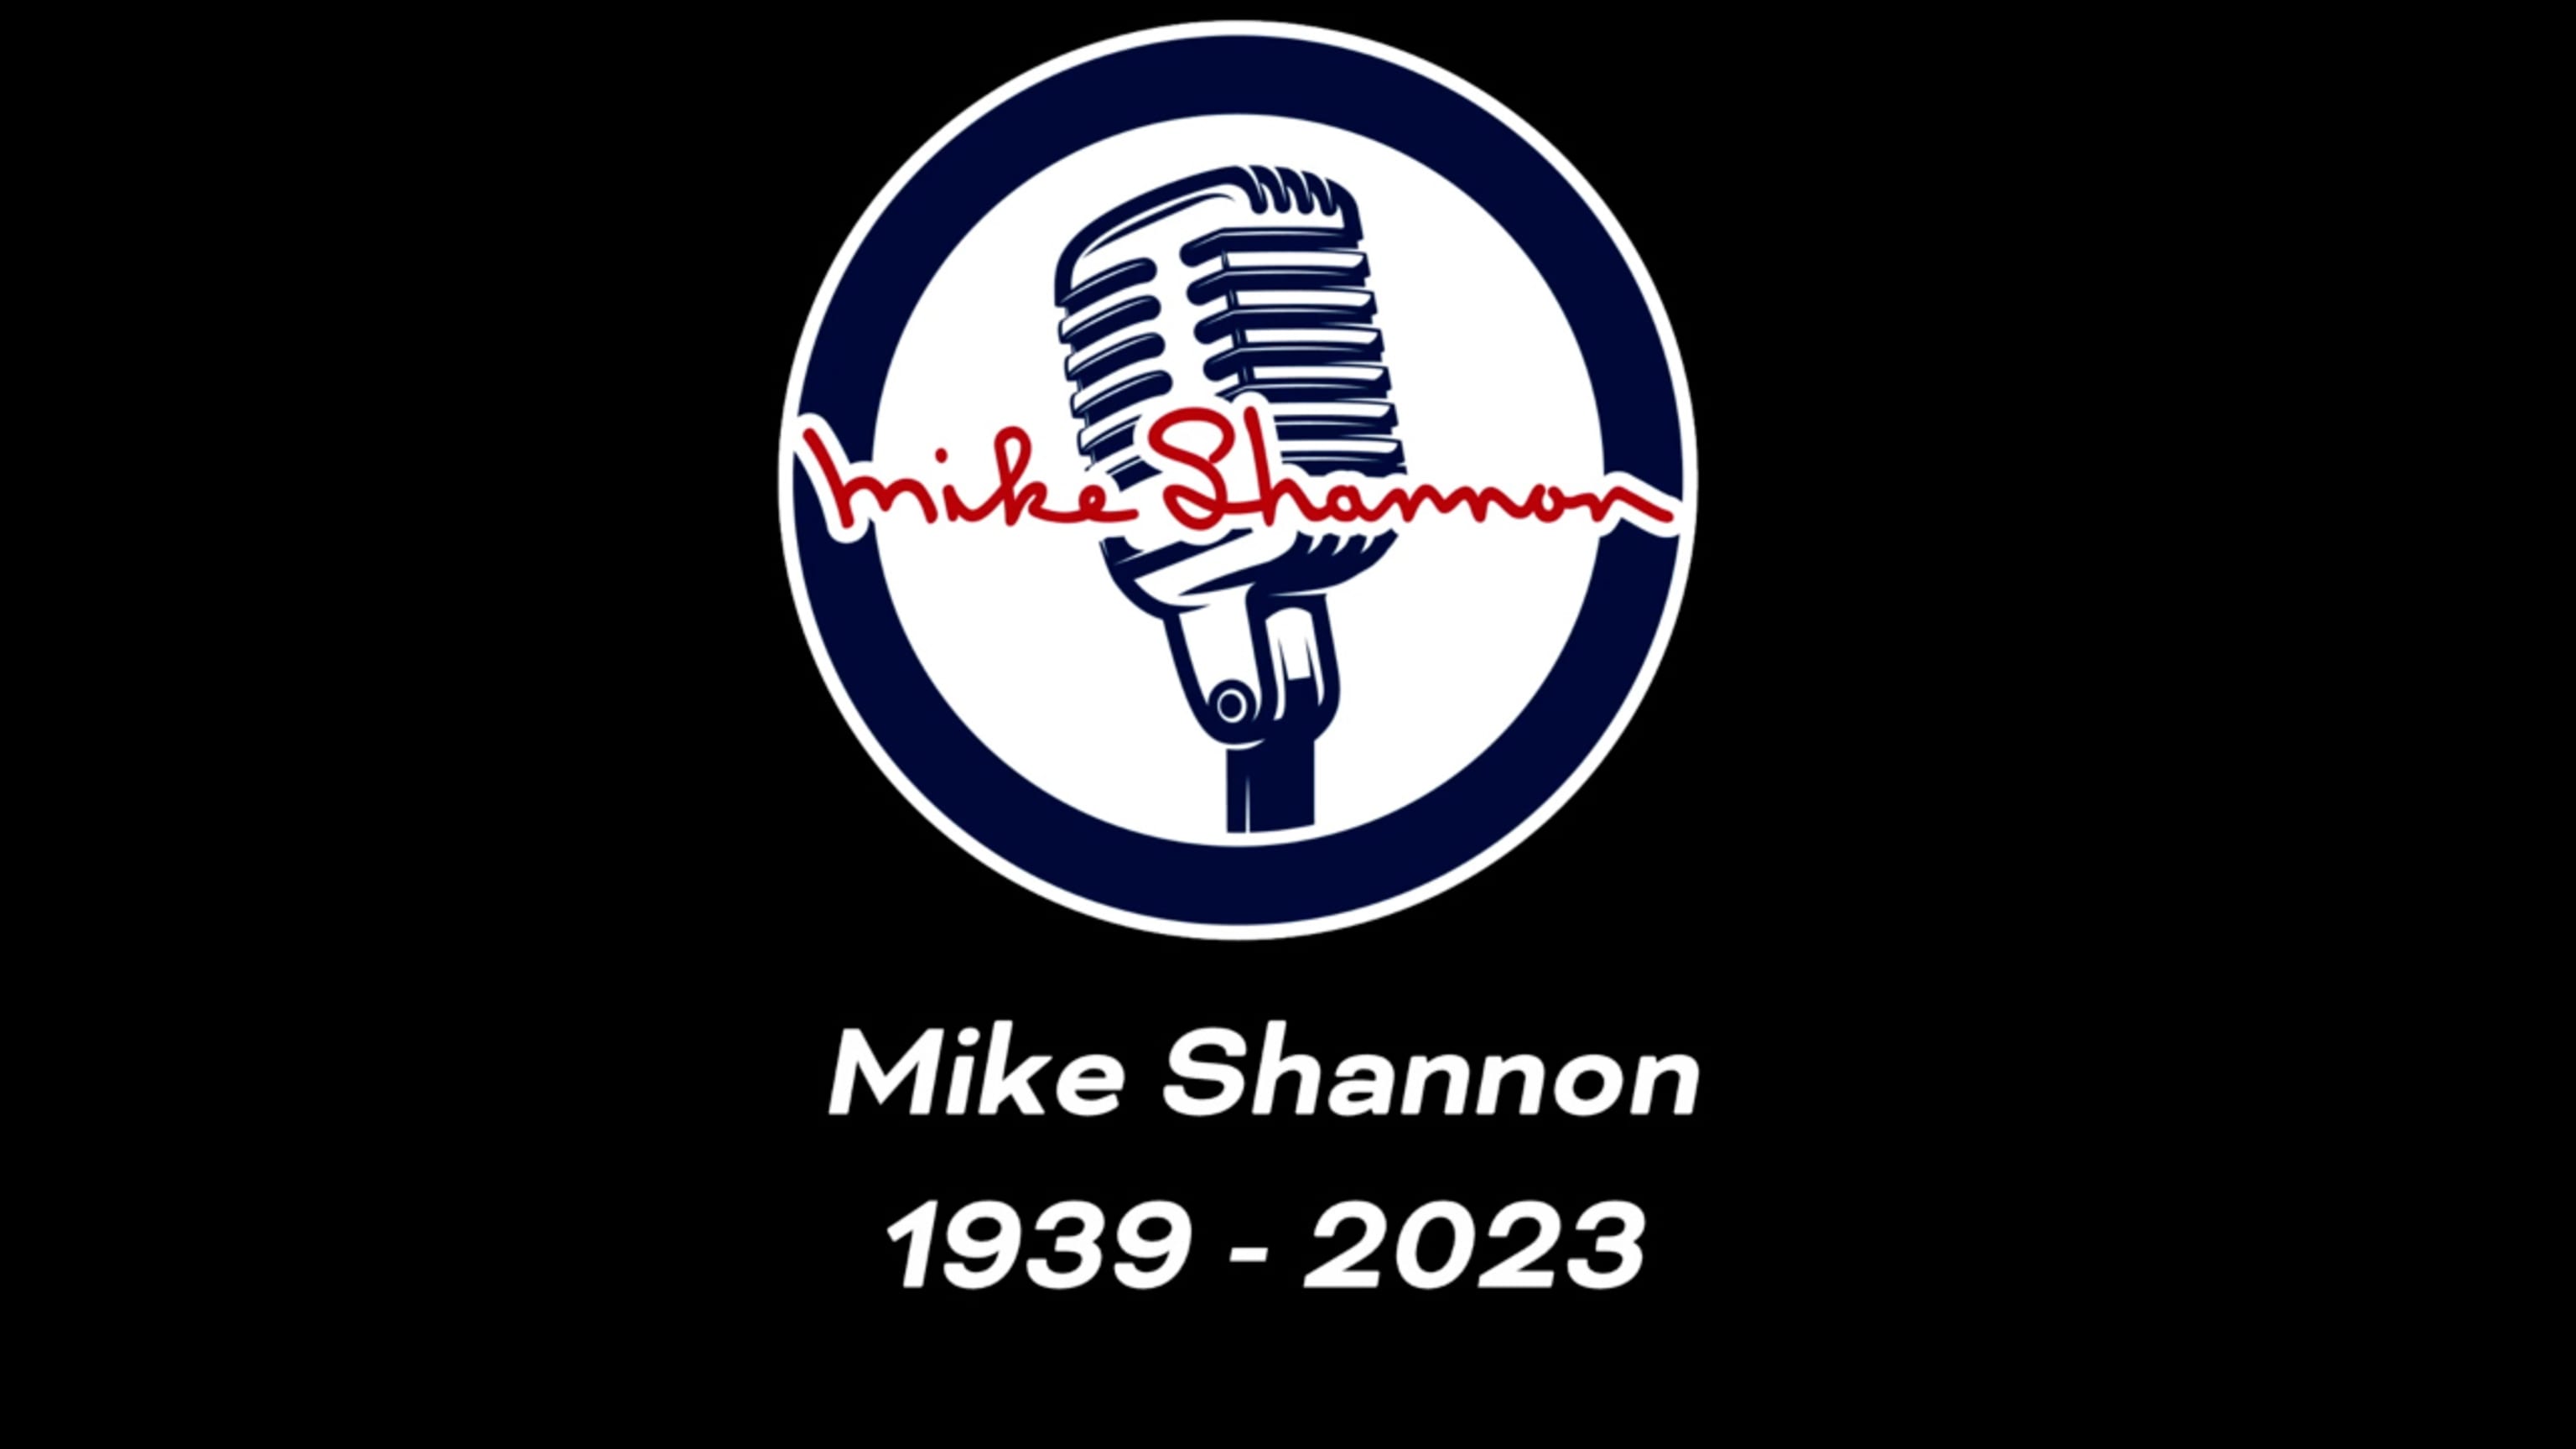 Mike Shannon dies at 83